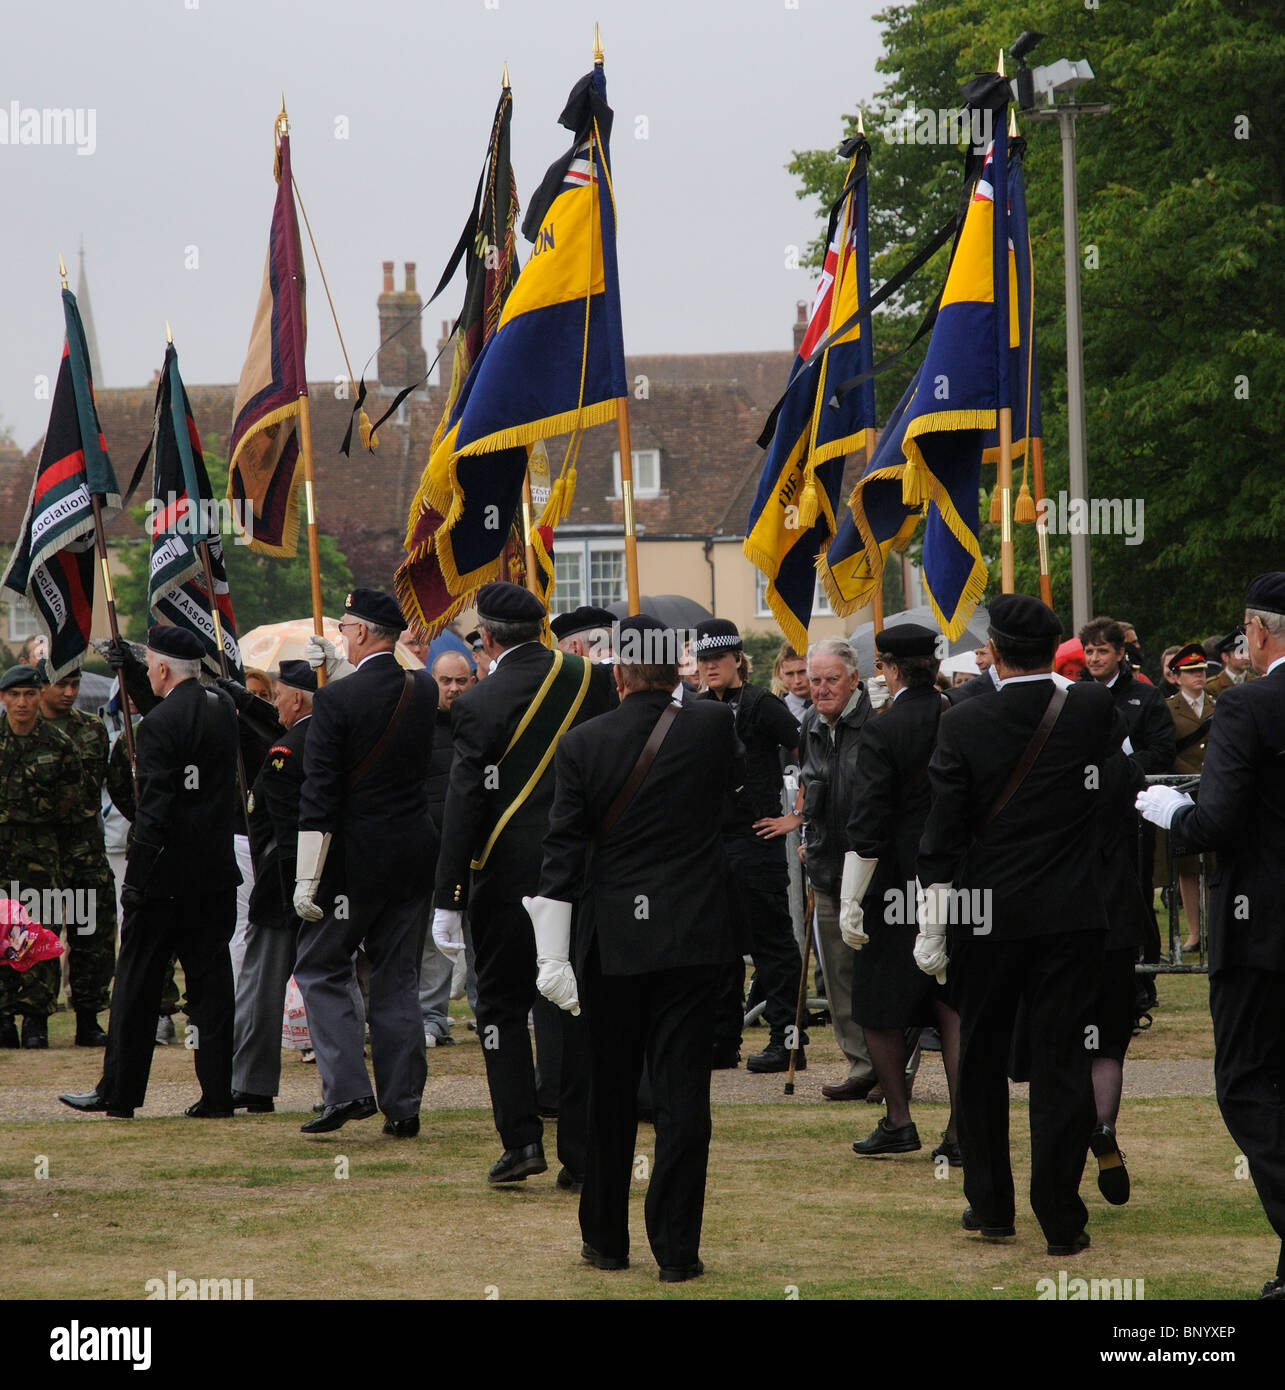 Royal British Legion members parade their standards with black ribbons flying in respect at a funeral service Stock Photo